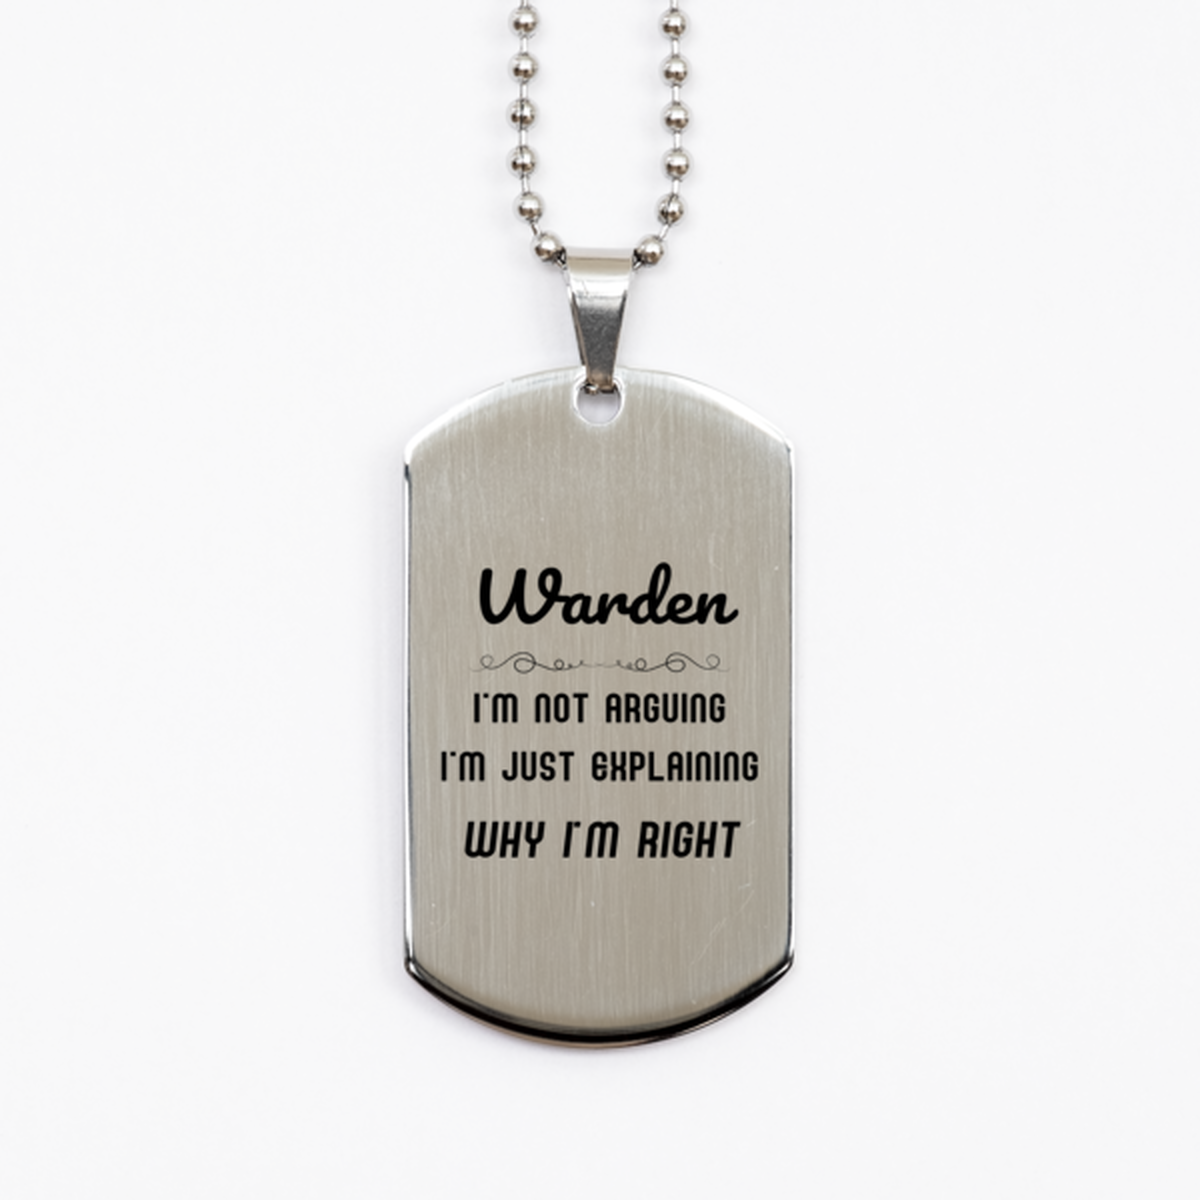 Warden I'm not Arguing. I'm Just Explaining Why I'm RIGHT Silver Dog Tag, Funny Saying Quote Warden Gifts For Warden Graduation Birthday Christmas Gifts for Men Women Coworker